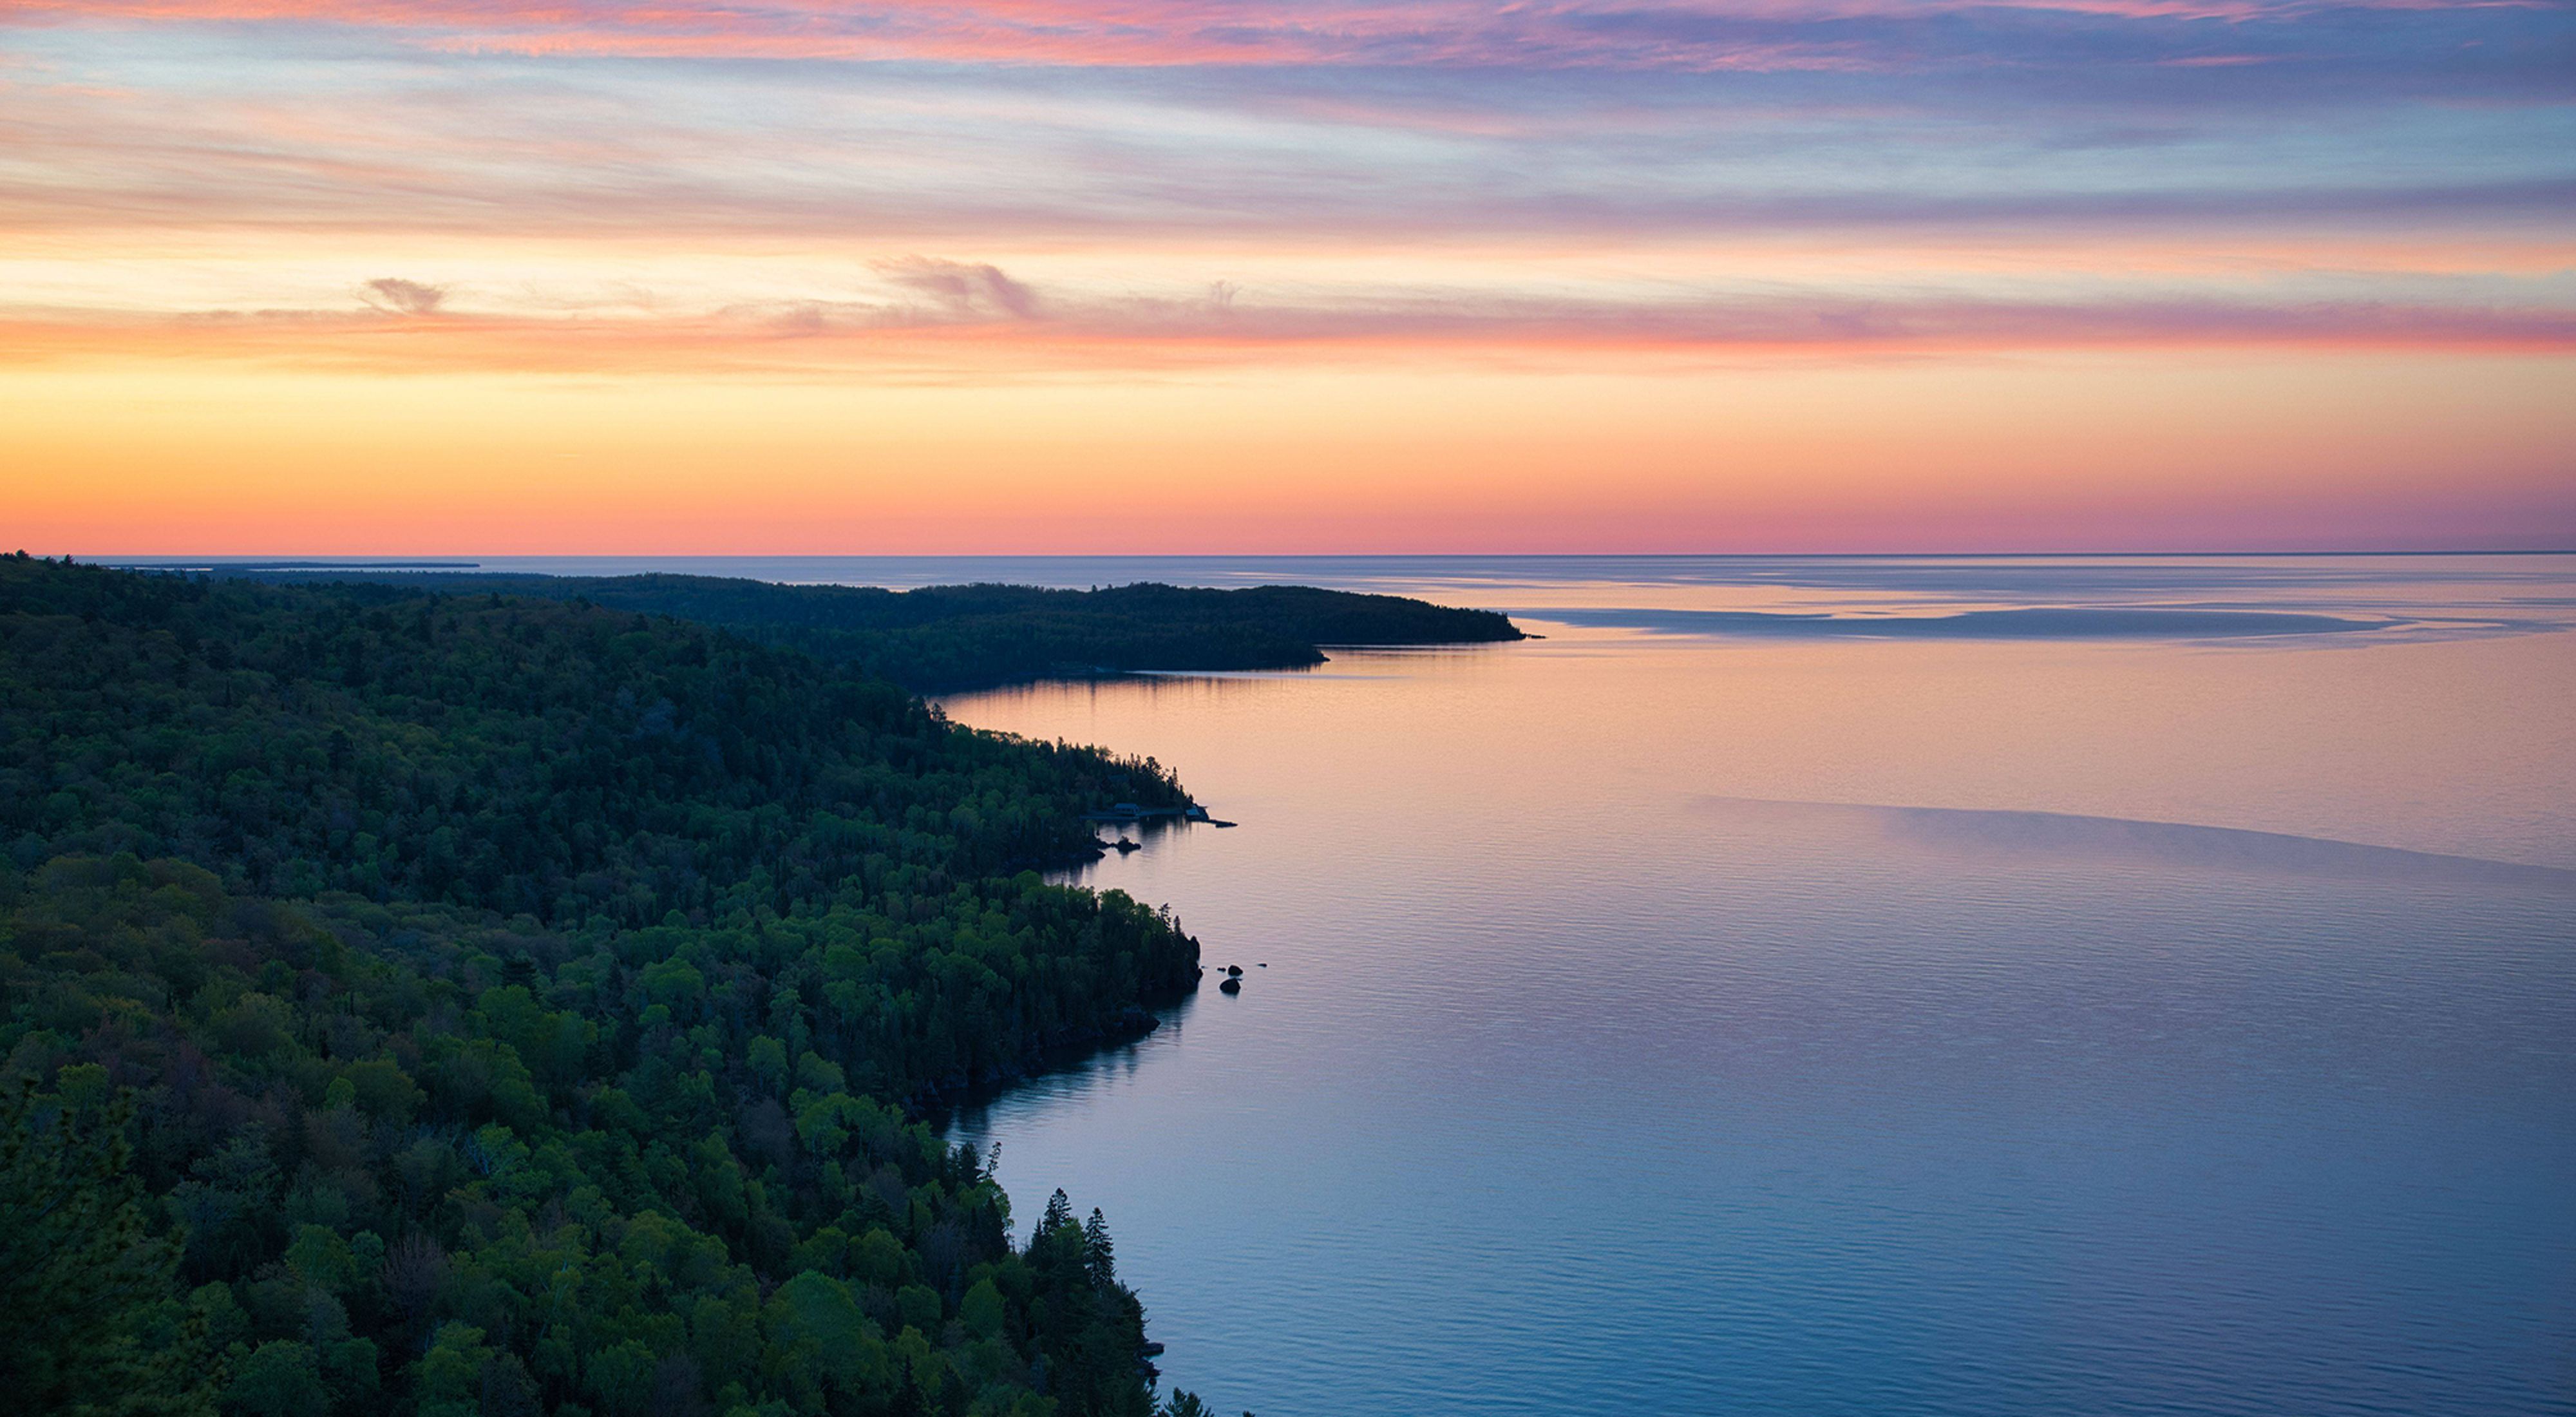 Sunrise with sparse clouds over the forested shores of Copper Harbor Peninsula on Lake Superior in Michigan.